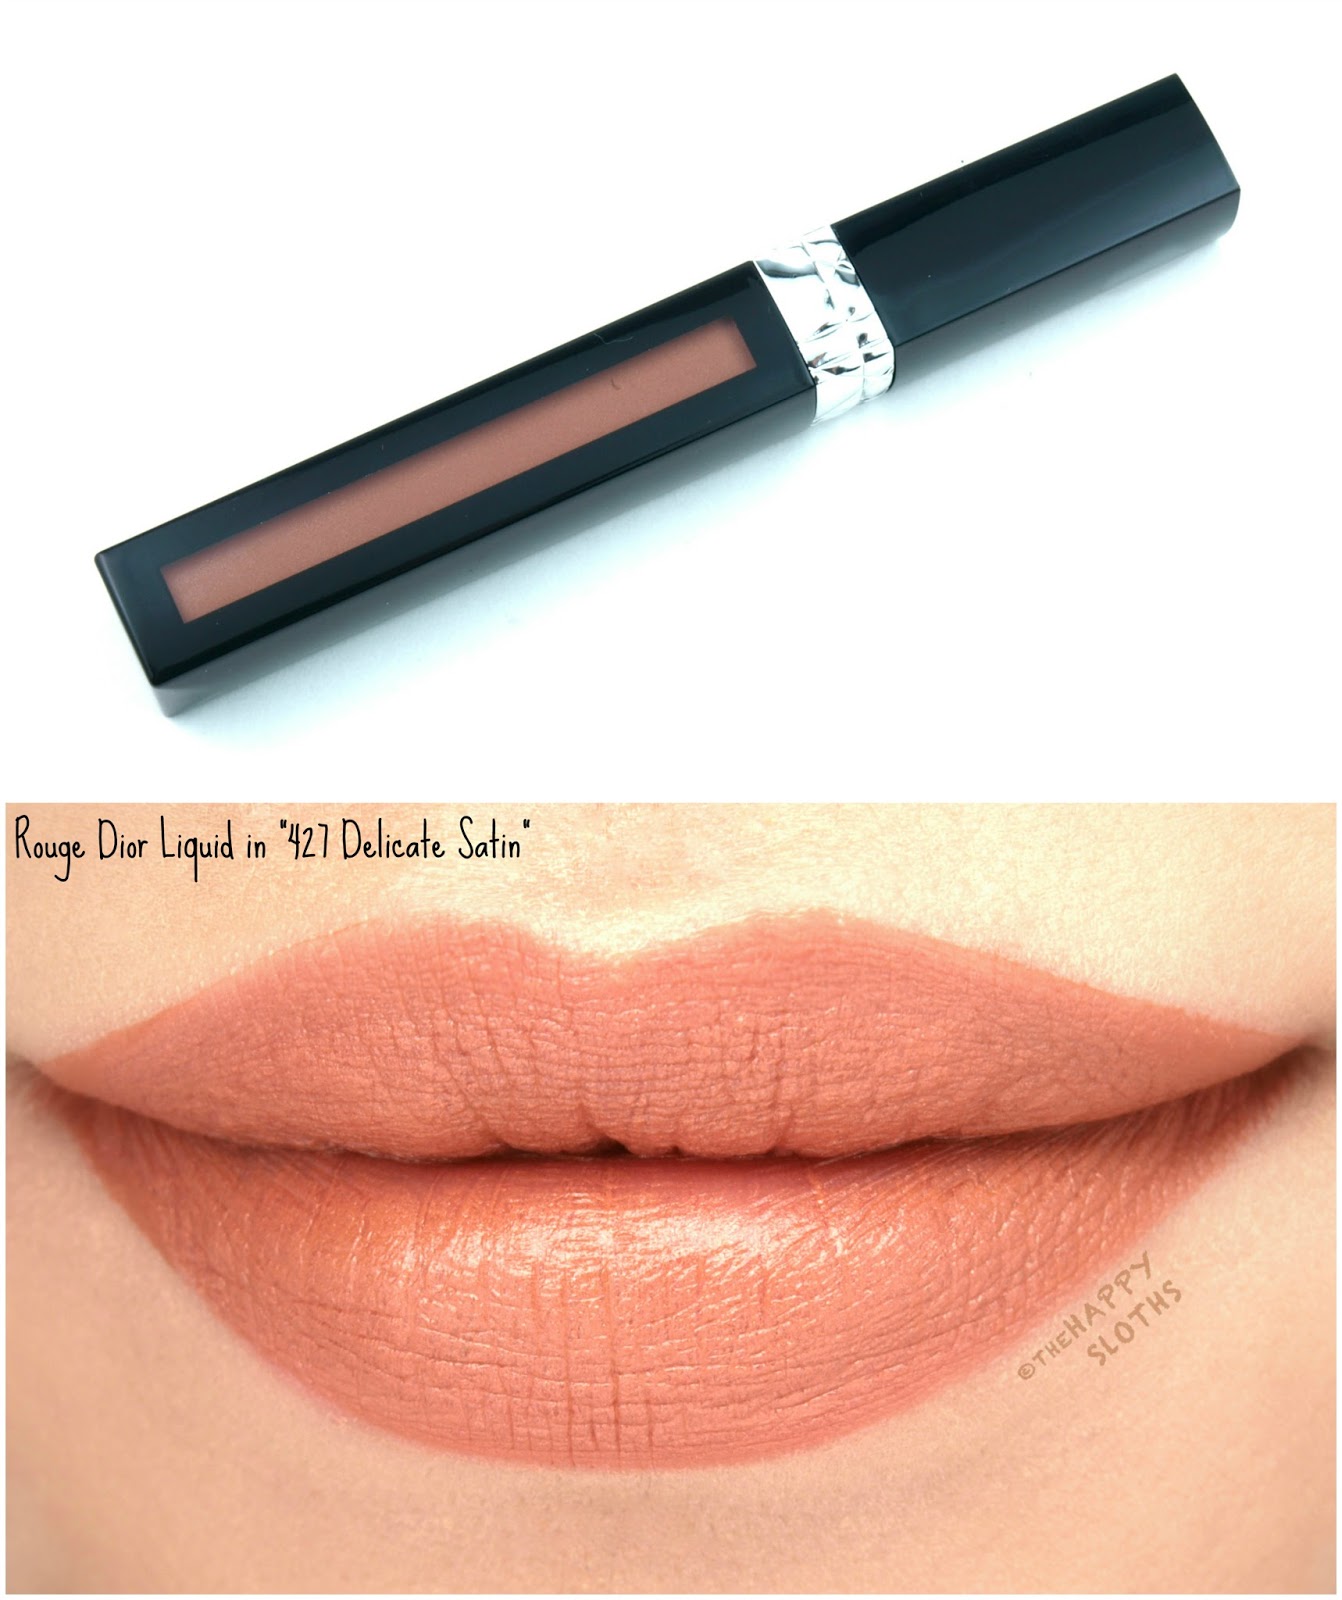 Dior Rouge Dior Liquid Lip Stain in "427 Delicate Satin": Review and Swatches